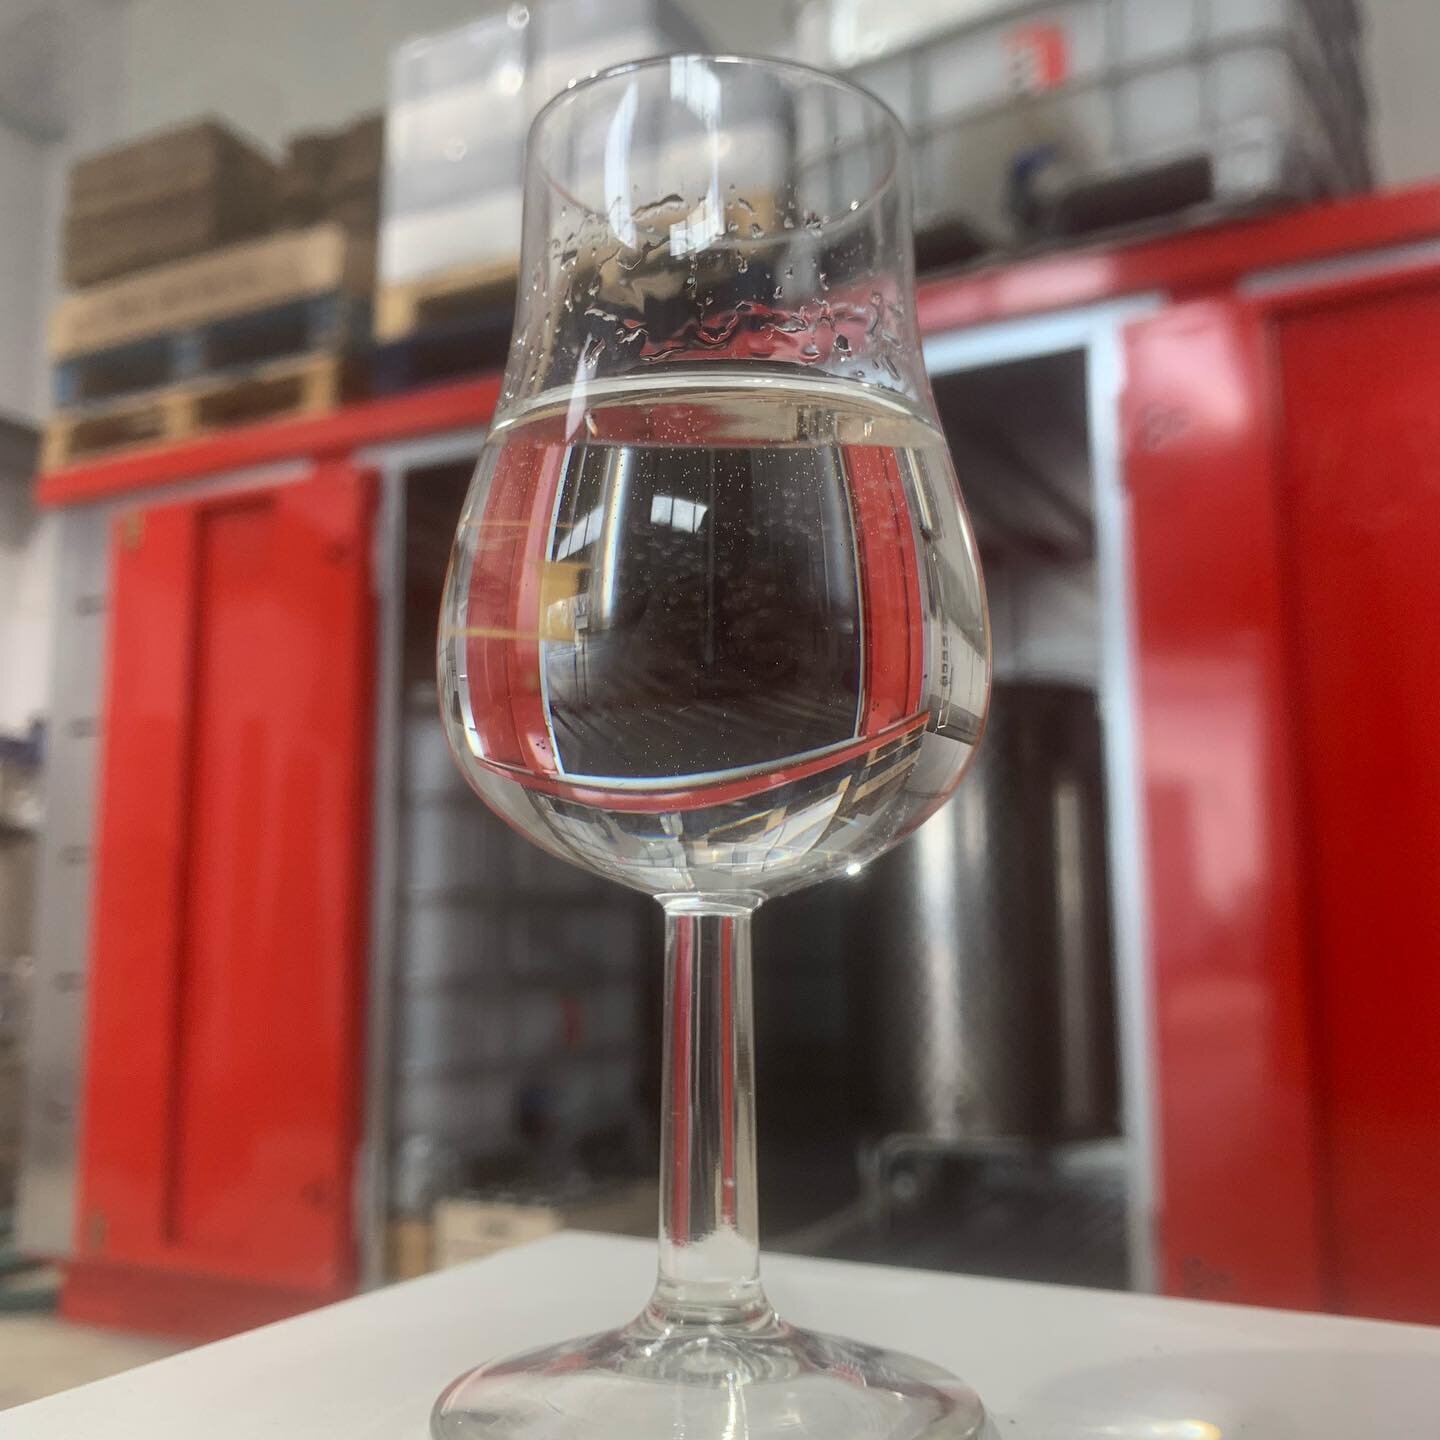 Our Silver Rum is currently &ldquo;marrying&rdquo; in our tanks to then be infused with our Spices later today!! Busy weeks ahead! 🥃☺️&bull;
&bull;
&bull;
&bull;
&bull;
&bull;
#craft #rum #surrey #surreyrum #silverrum #whiterum #spicedrum #announcem